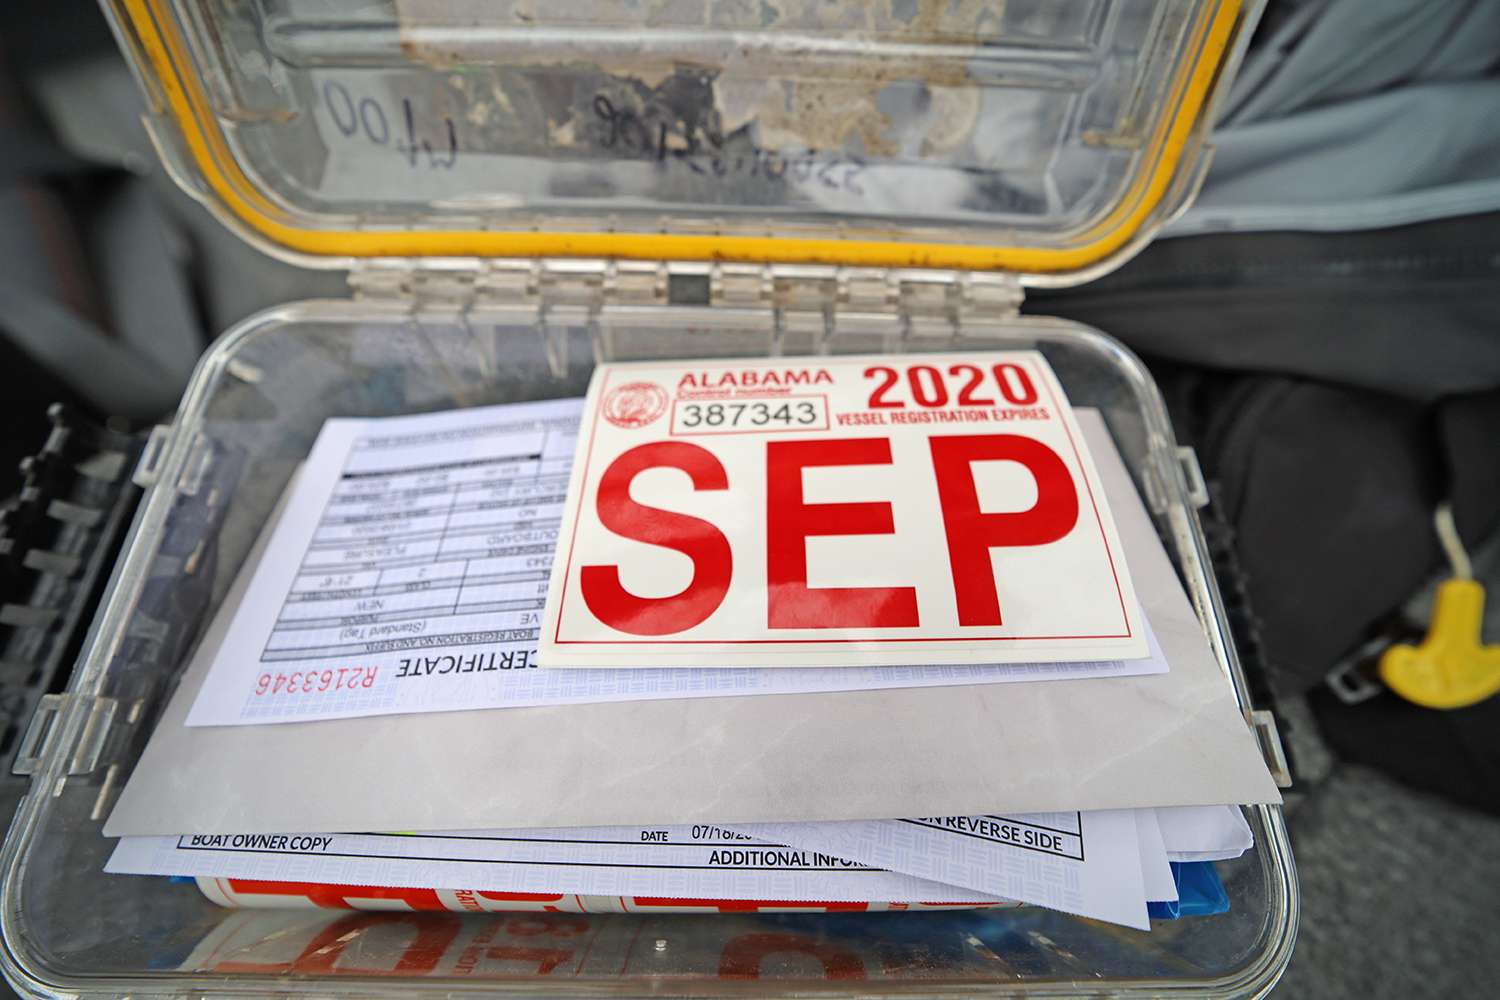 He keeps his required boater registration and other documentation in a waterproof box.